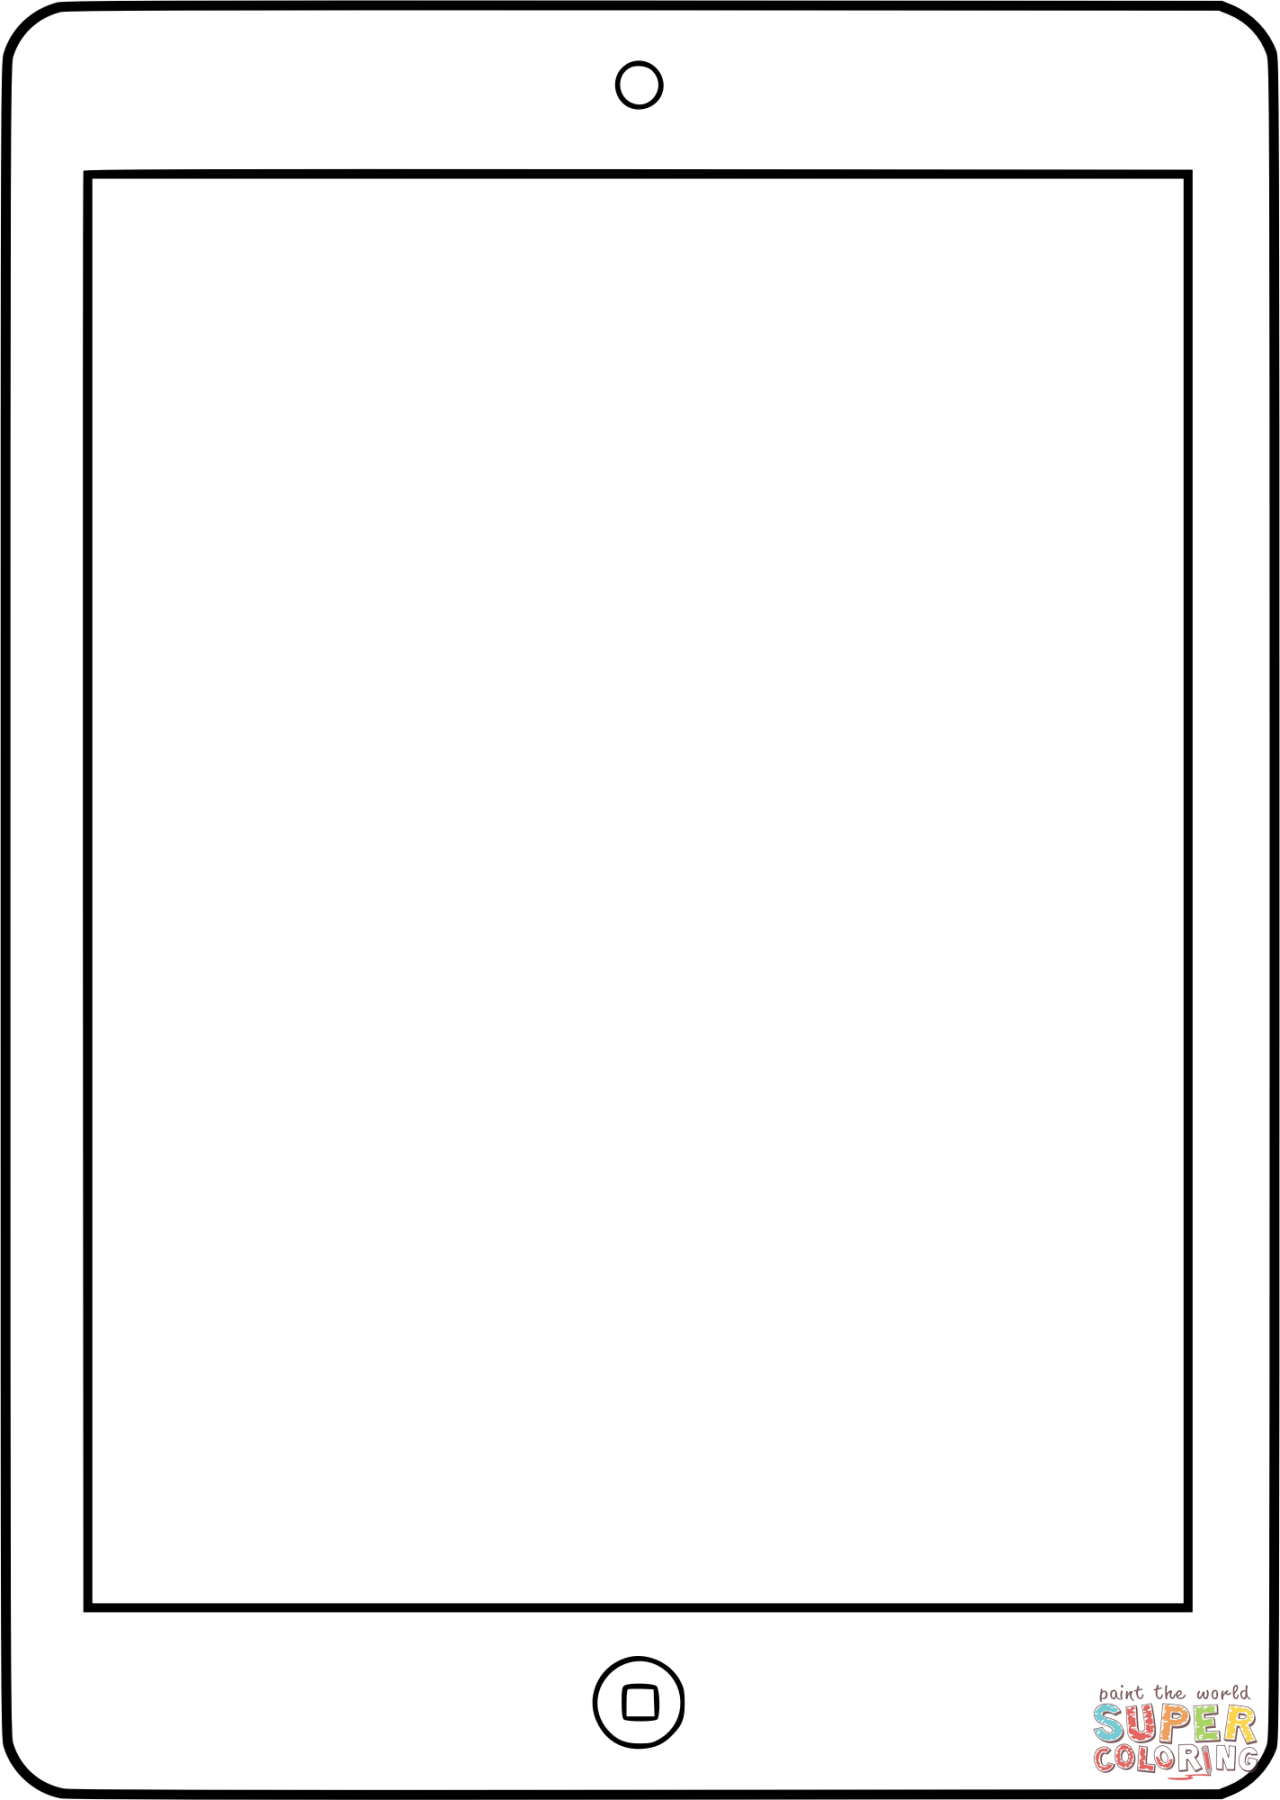 IPad Outline coloring page  Free Printable Coloring Pages